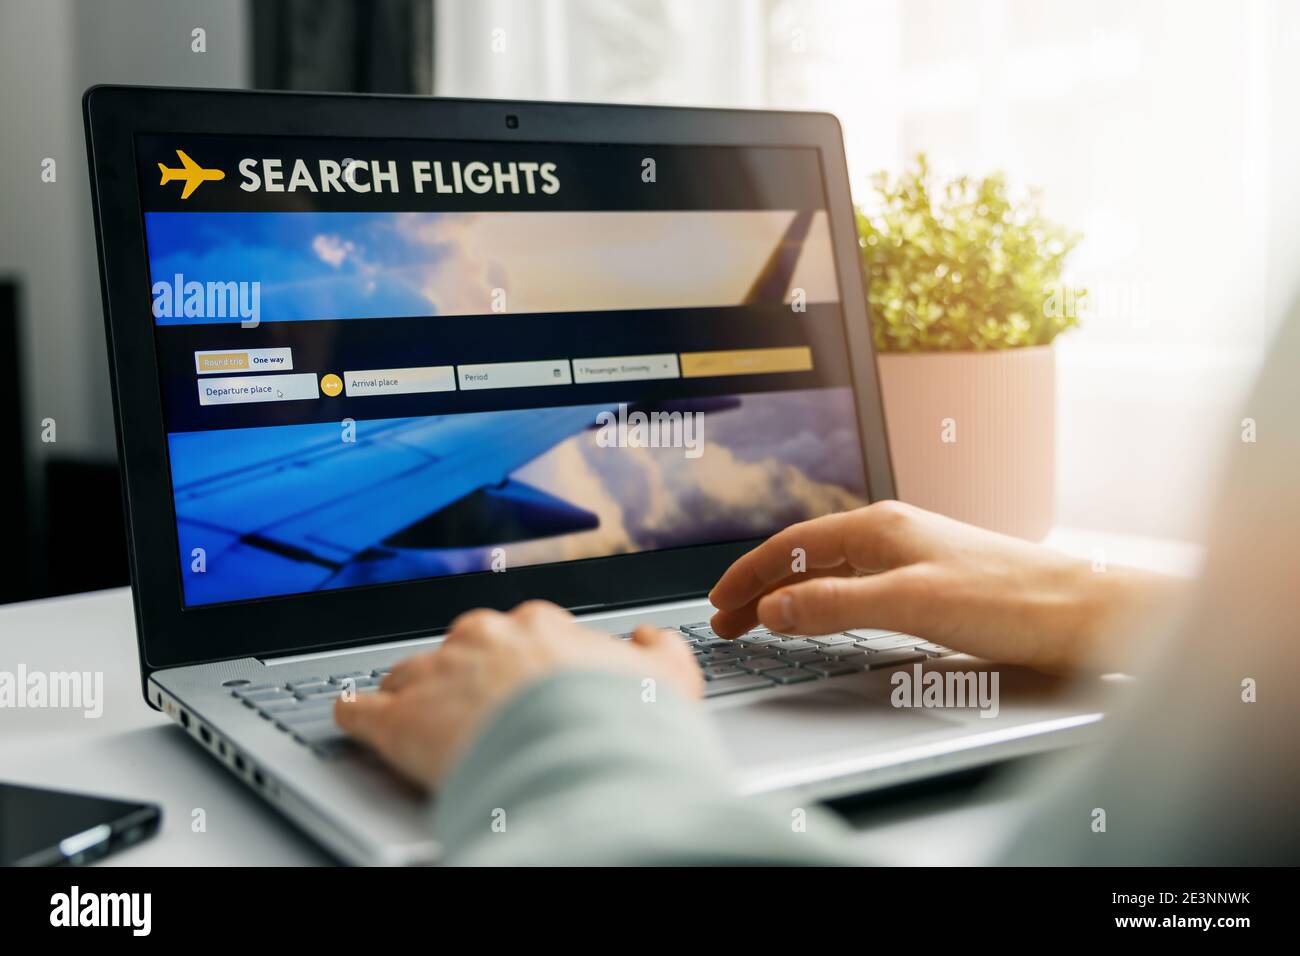 online booking - person using internet website in laptop for flight search and reservation Stock Photo